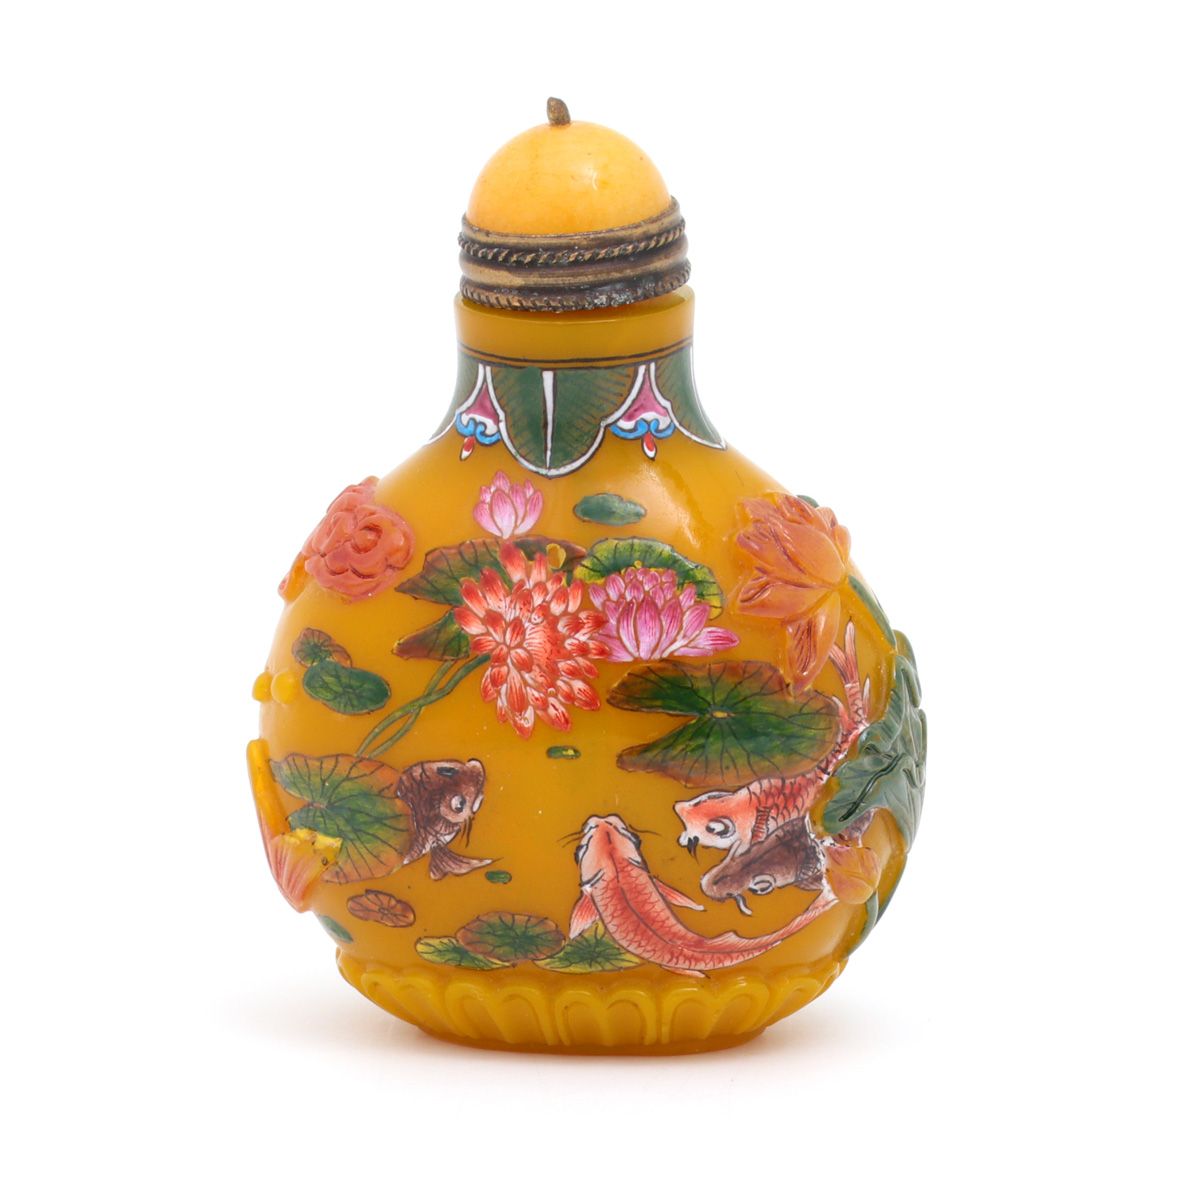 A SNUFF-BOTTLE A SNUFF-BOTTLE Chinese glass, polychrome decoration depicting lot&hellip;